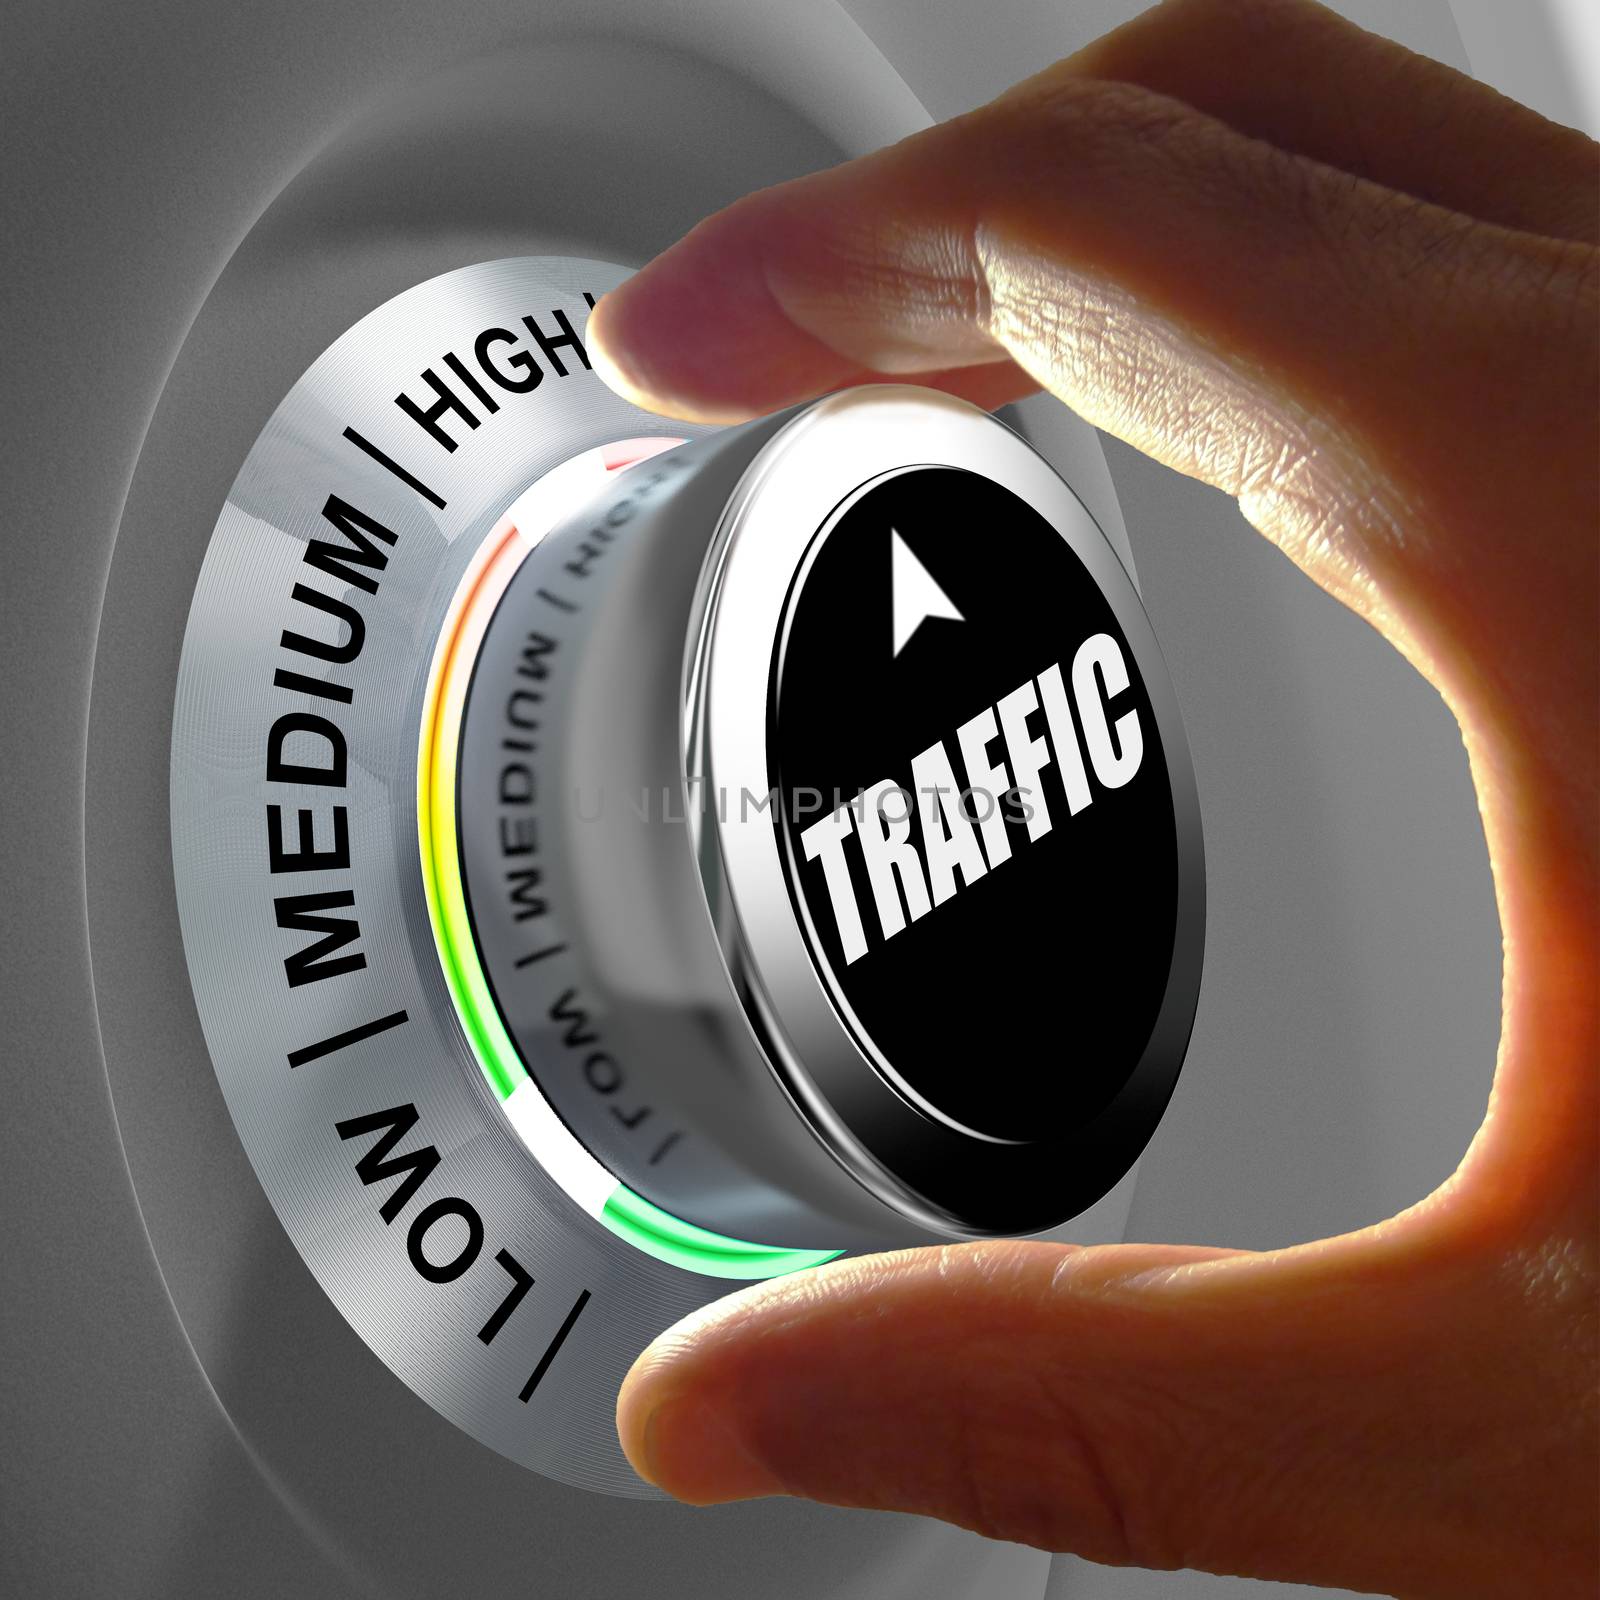 Hand rotating a button and selecting the level of traffic. This concept illustration is a metaphor for choosing the level of traffic (web site, car...) . Three levels are available: low, medium and high.